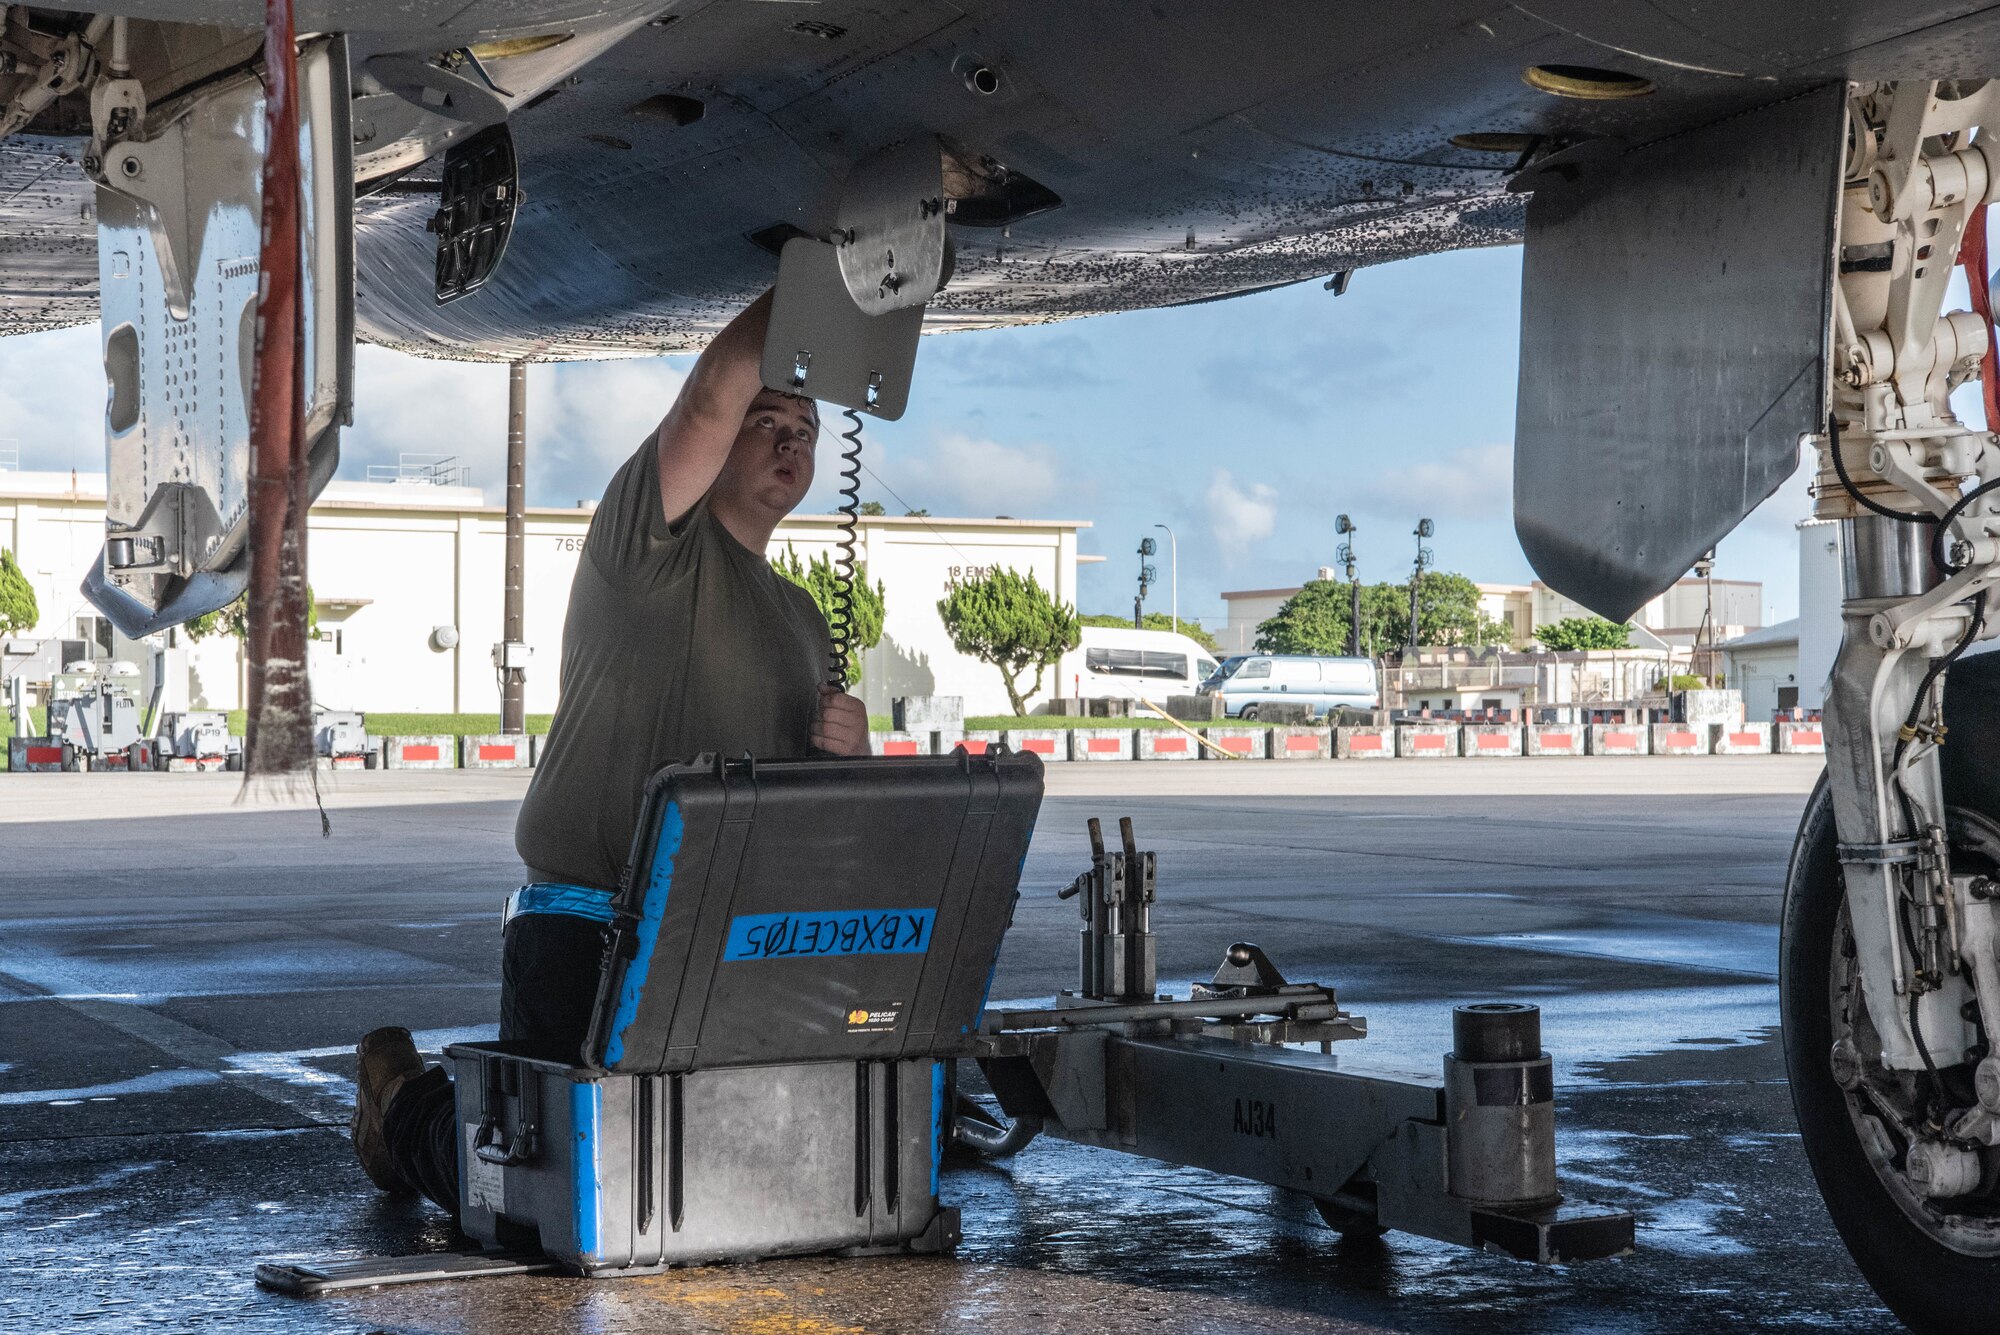 An Airman with the 44th AMU runs a diagnostic test on an F-15C Eagle engine during recovery procedures.